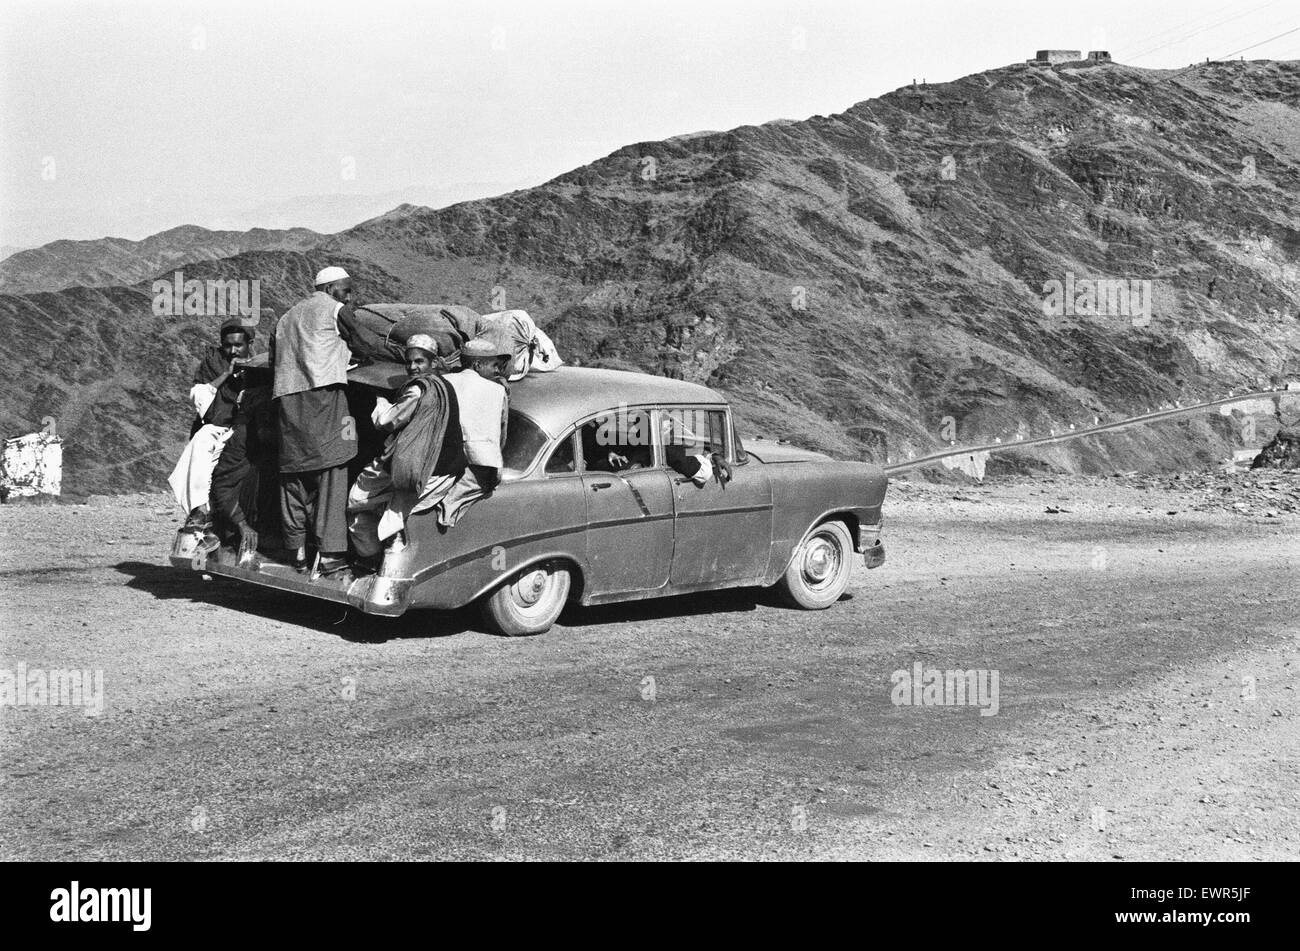 Khyber Pass taxi service. One of the strangest taxi services in the world. Up to 14 people cram into and outside of old American Chevrolet cars . April 1977 Stock Photo